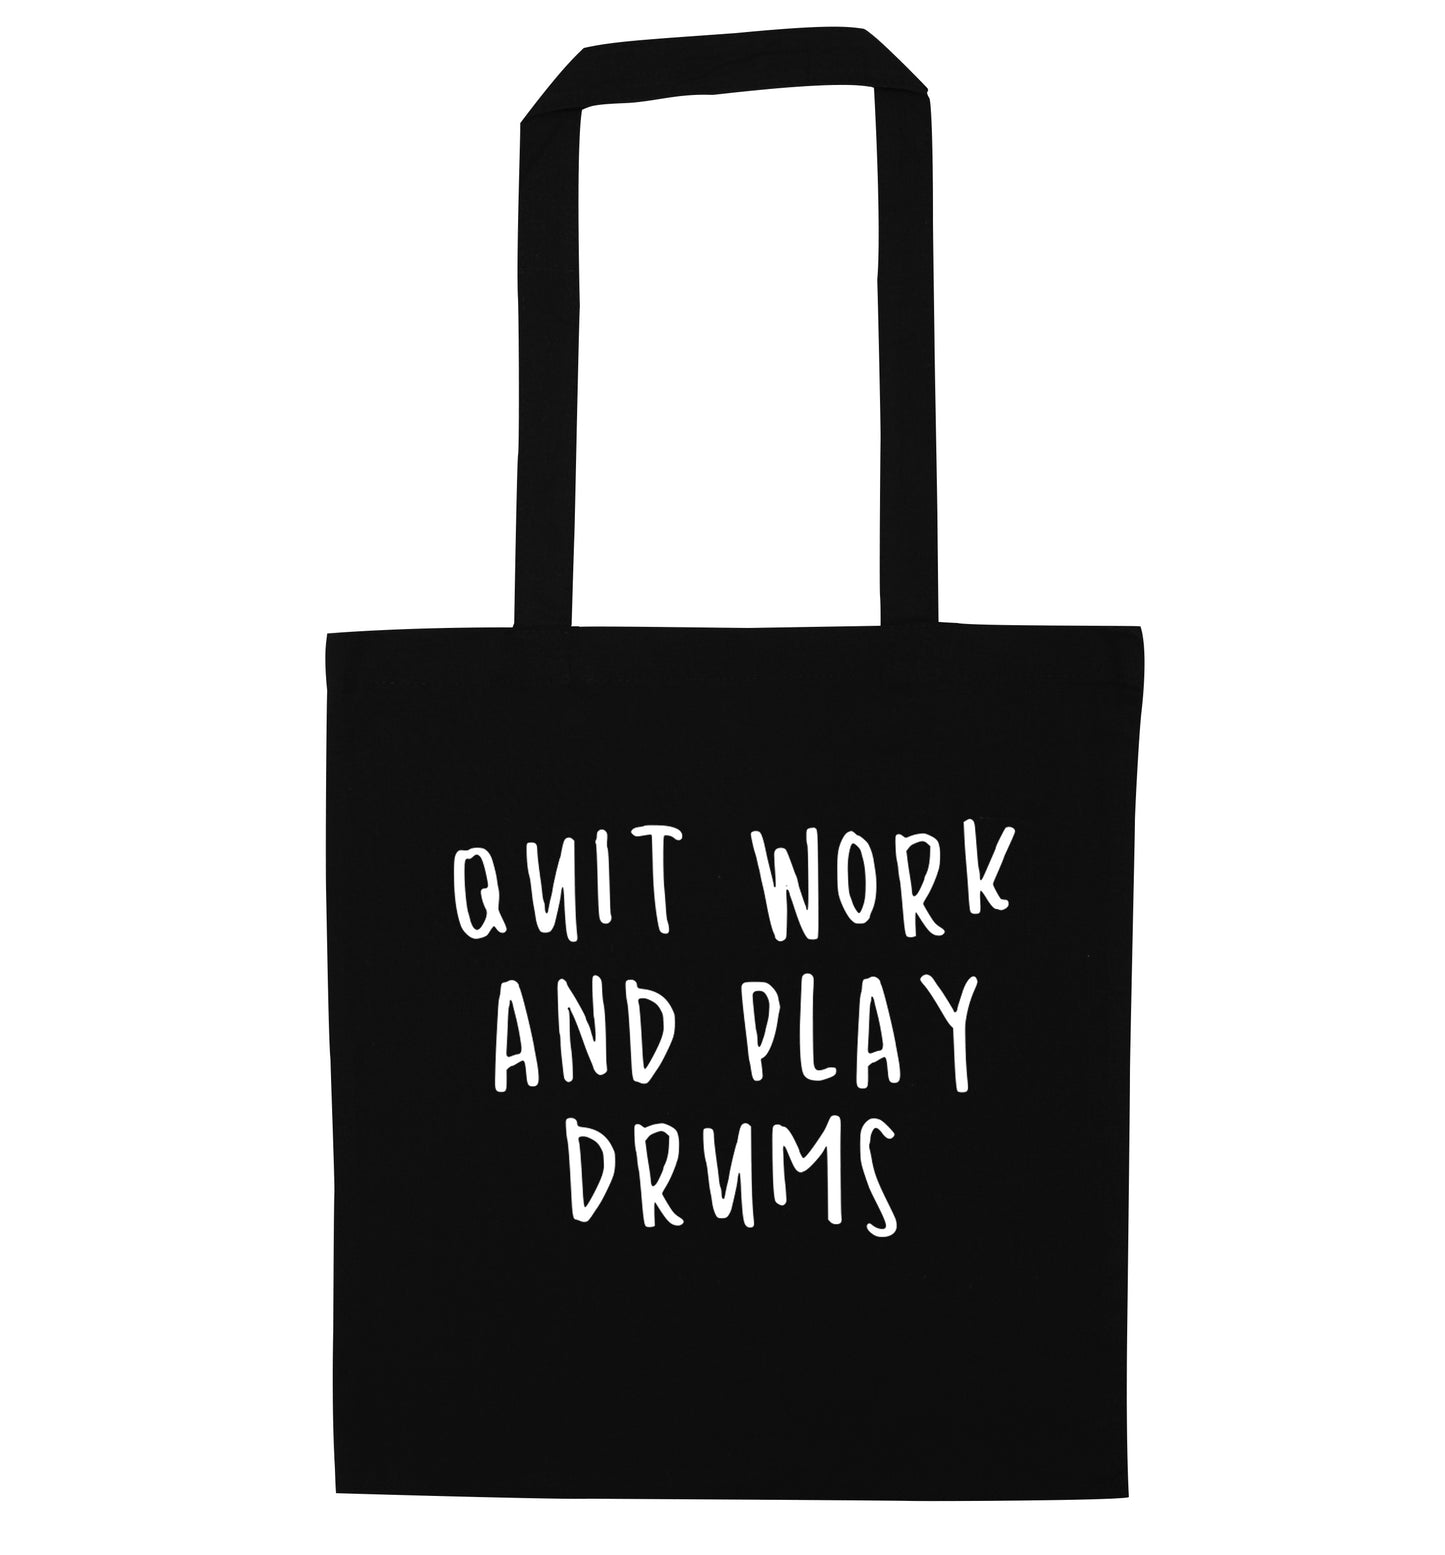 Quit work and play drums black tote bag